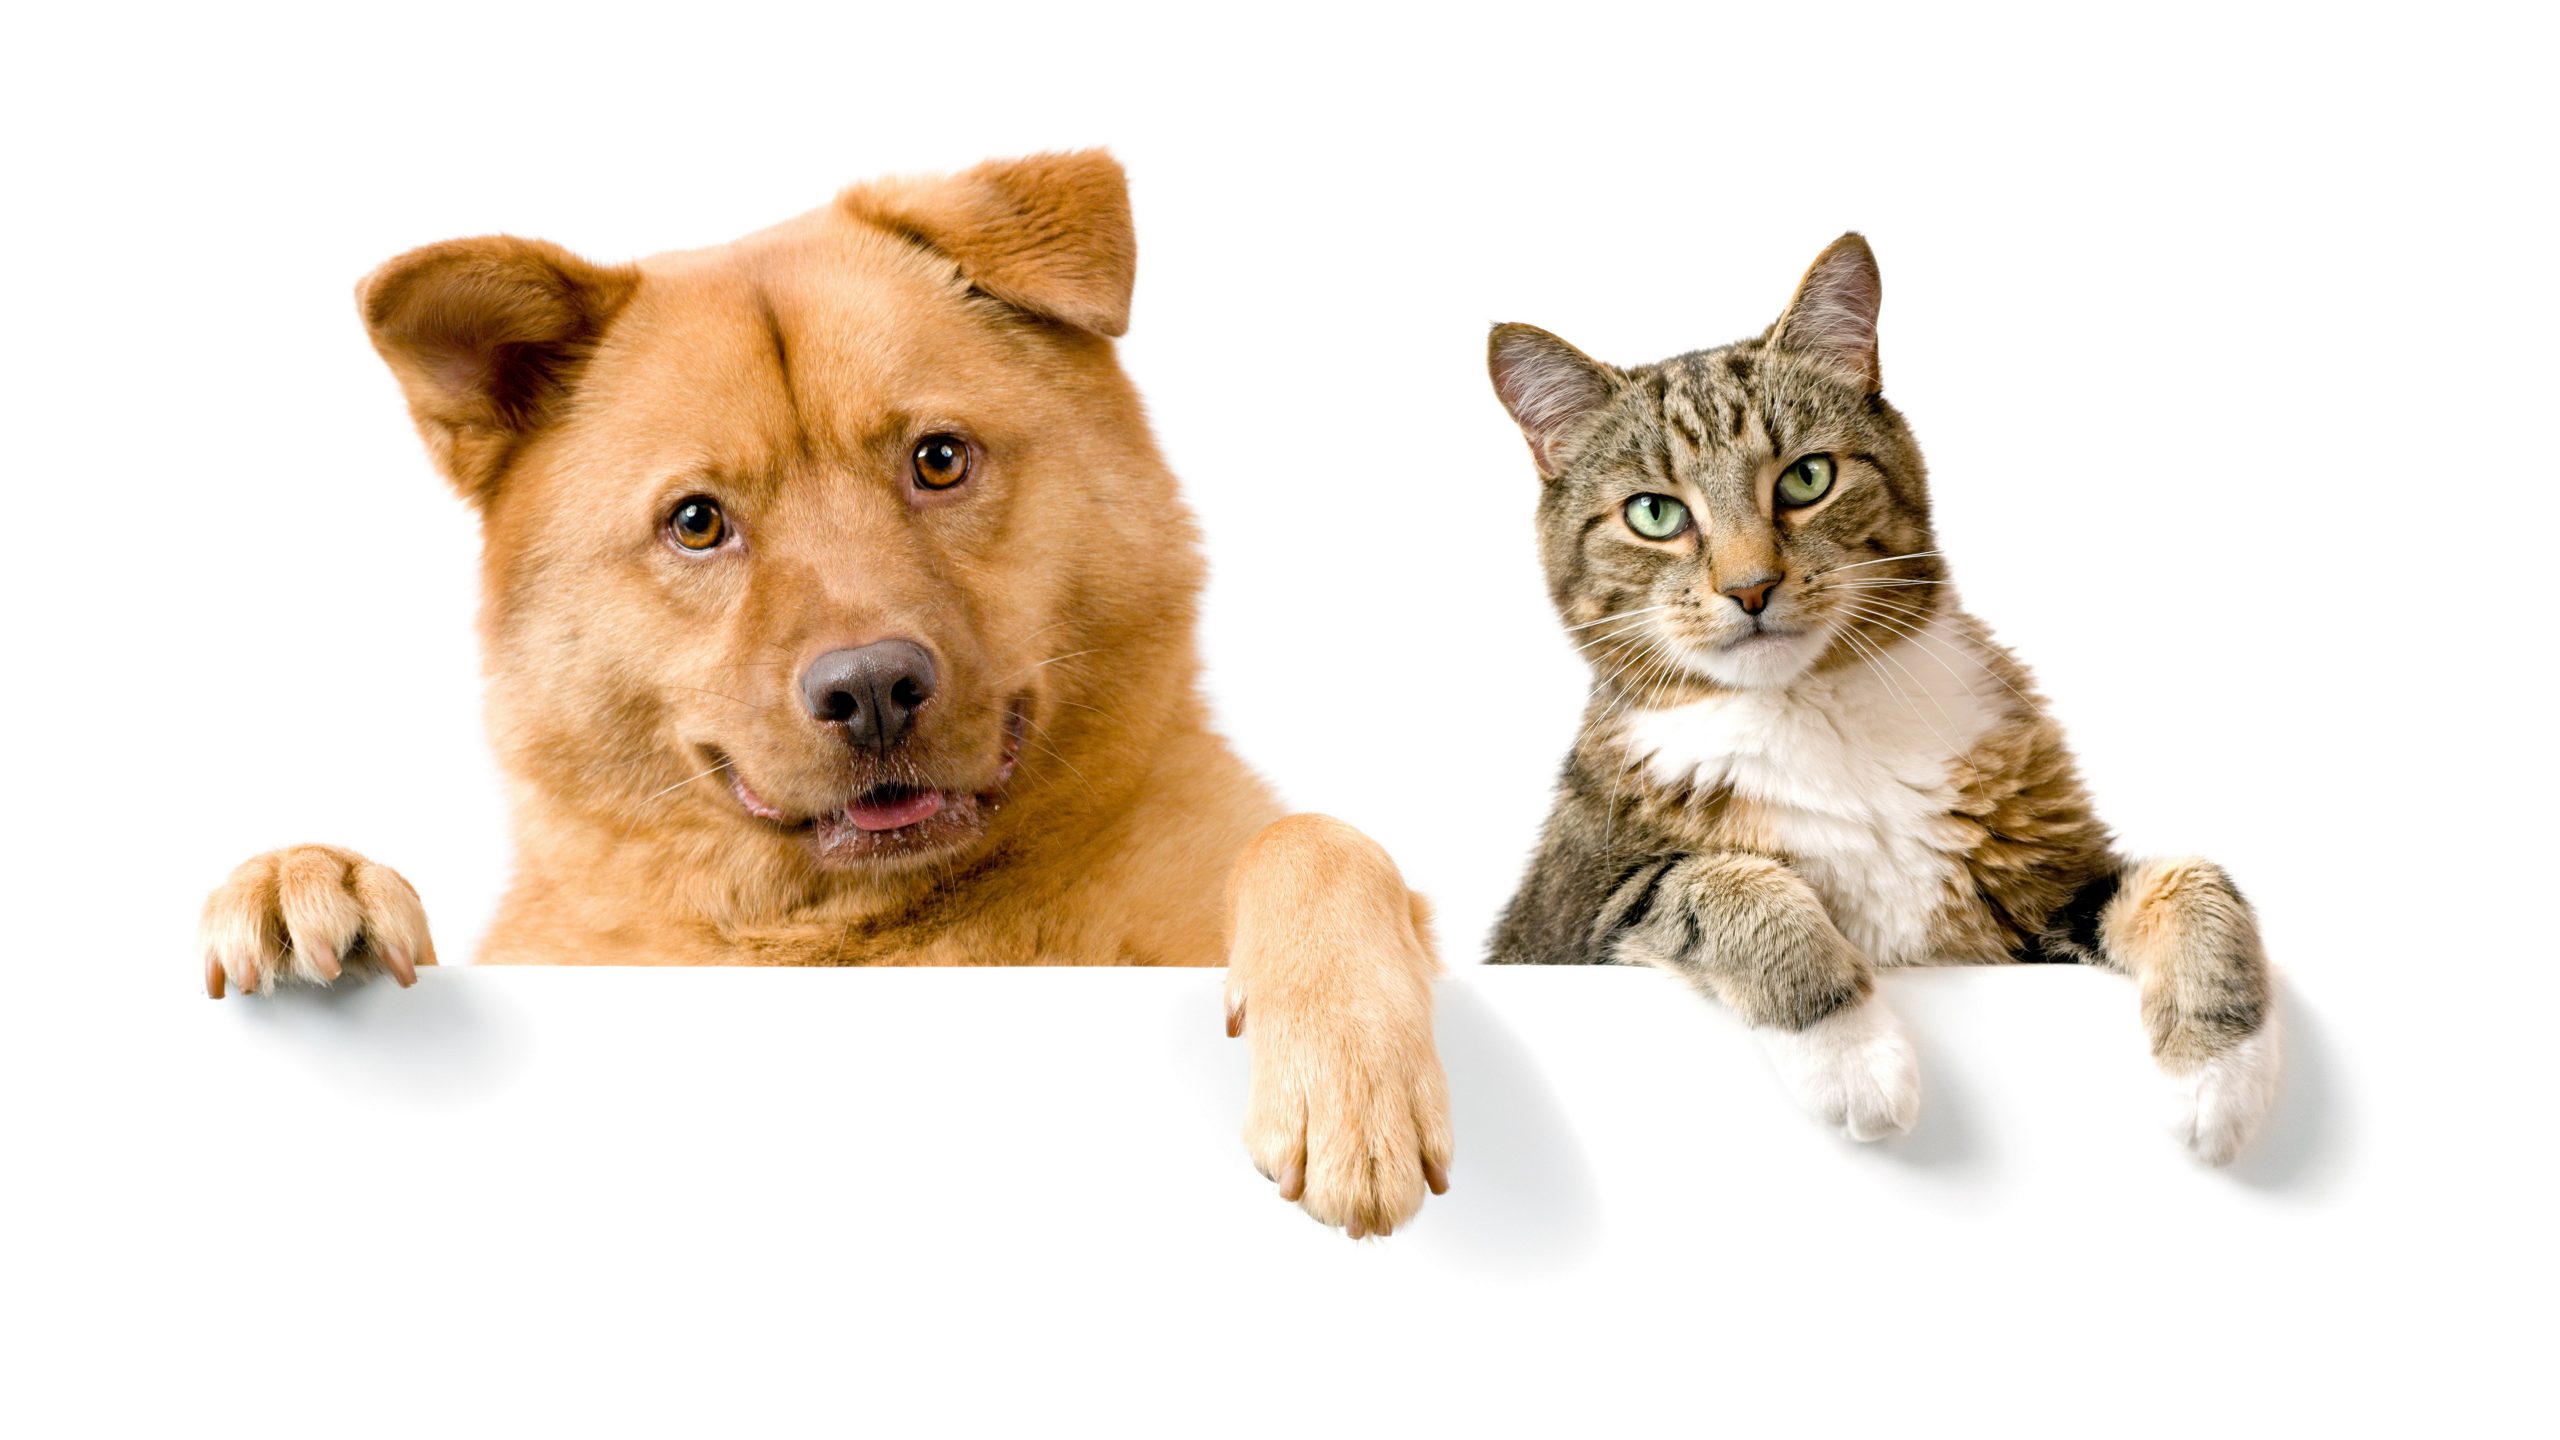 Funny picture of dogs and cat together, pets, animal, domestic wallpaper